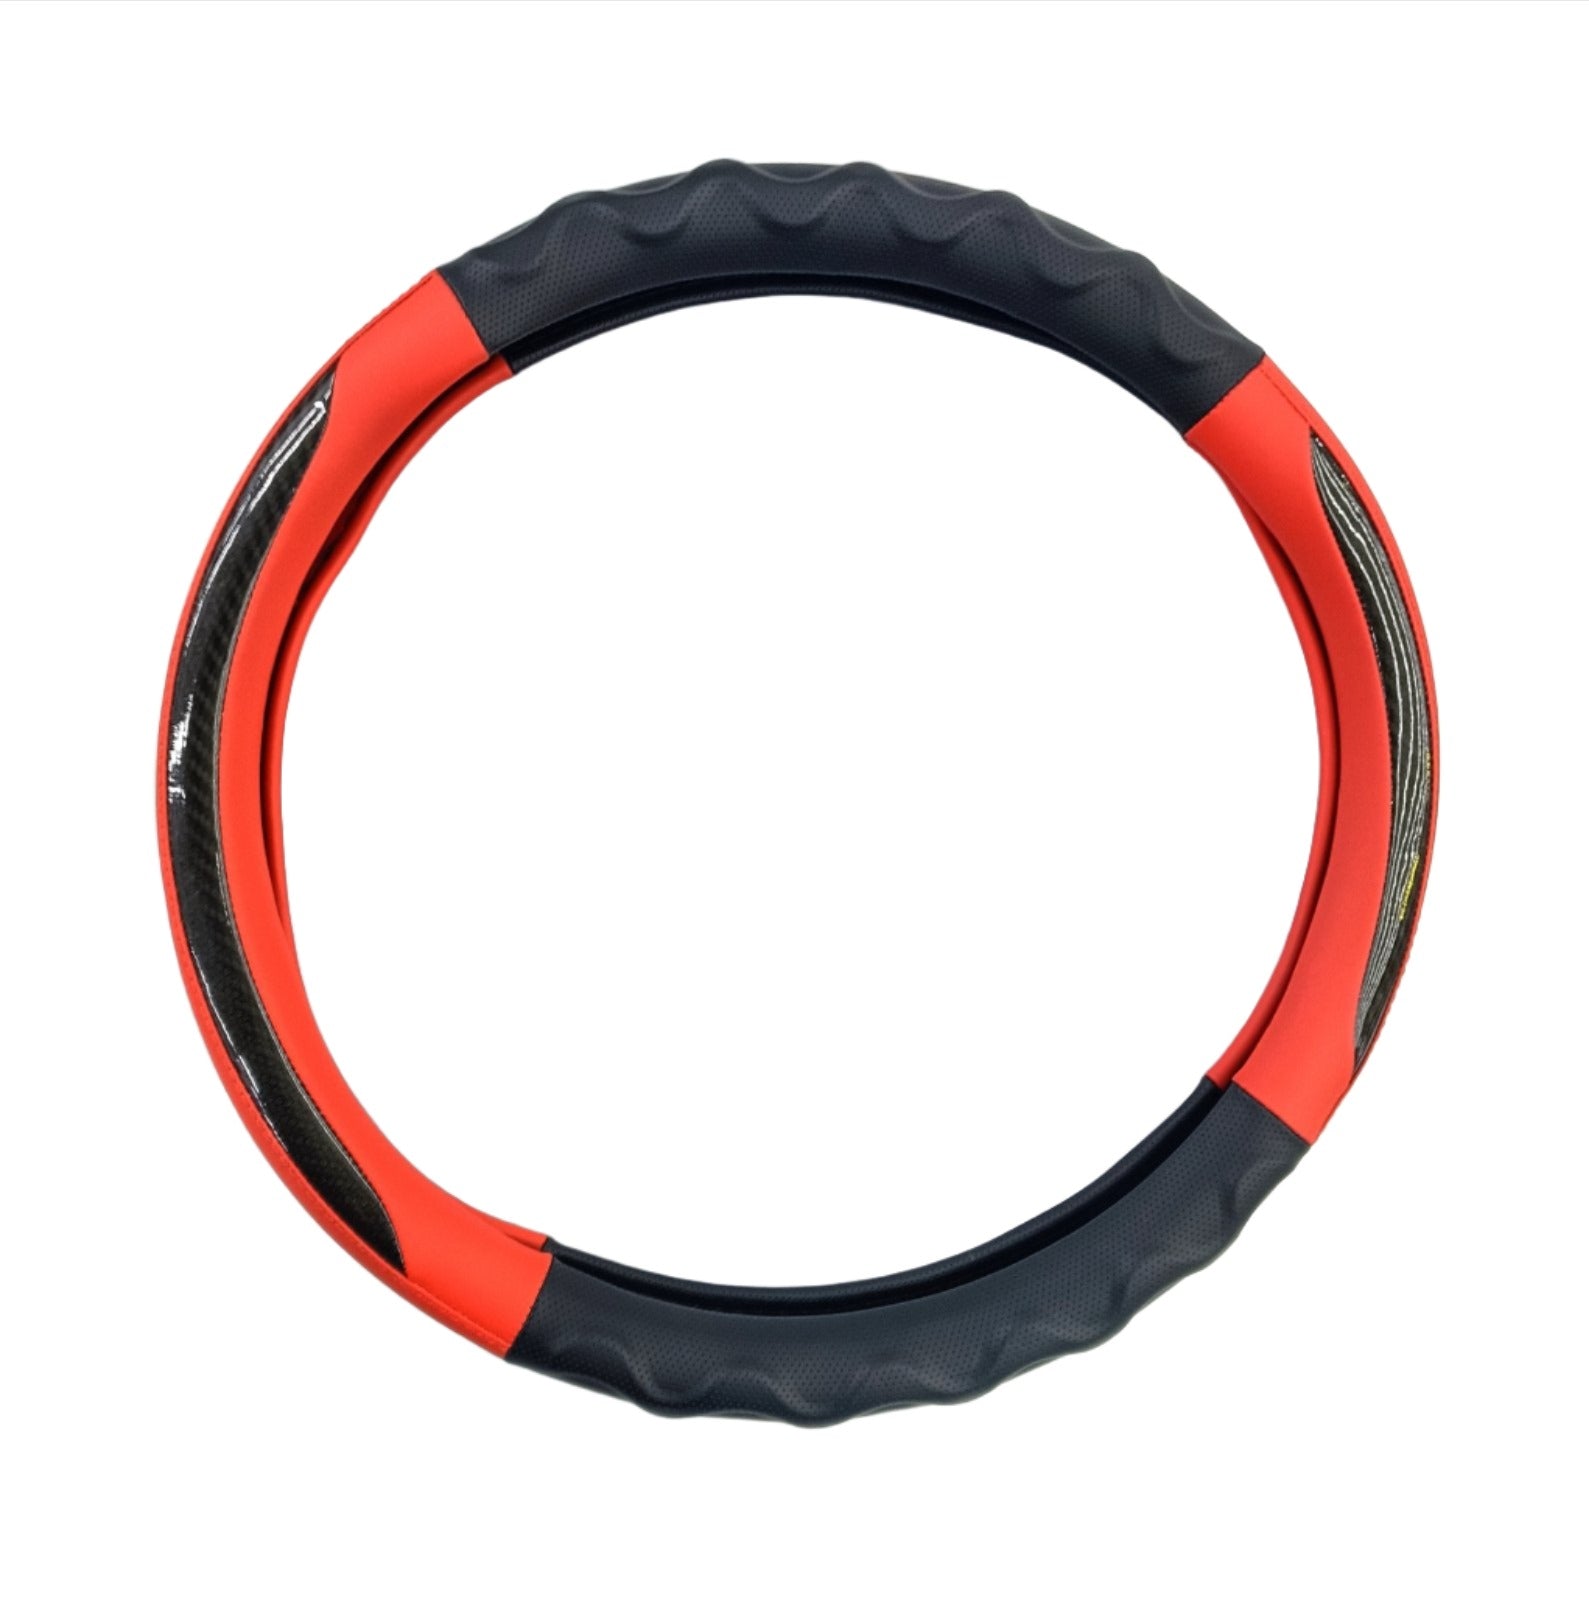 STEERING COVER CIRCLE (T)